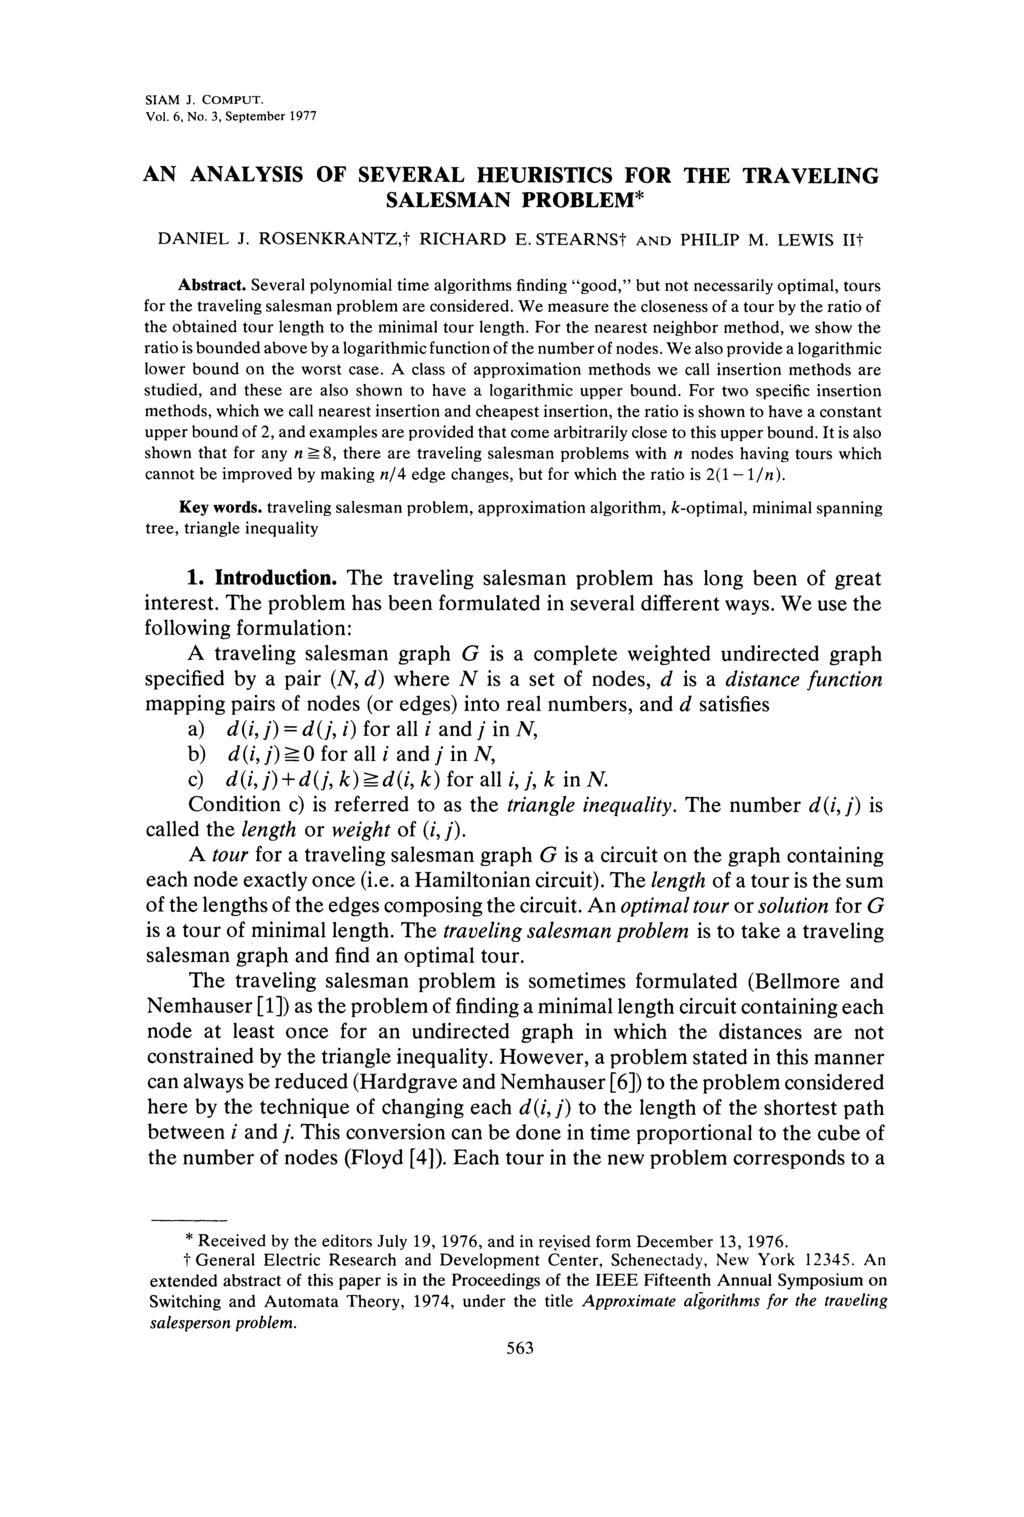 SIAM J. COMPUT. Vol. 6, No. 3, September 1977 AN ANALYSIS OF SEVERAL HEURISTICS FOR THE TRAVELING SALESMAN PROBLEM* DANIEL J. ROSENKRANTZ, RICHARD E. STEARNS? AND PHILIP M. LEWIS II? Abstract.